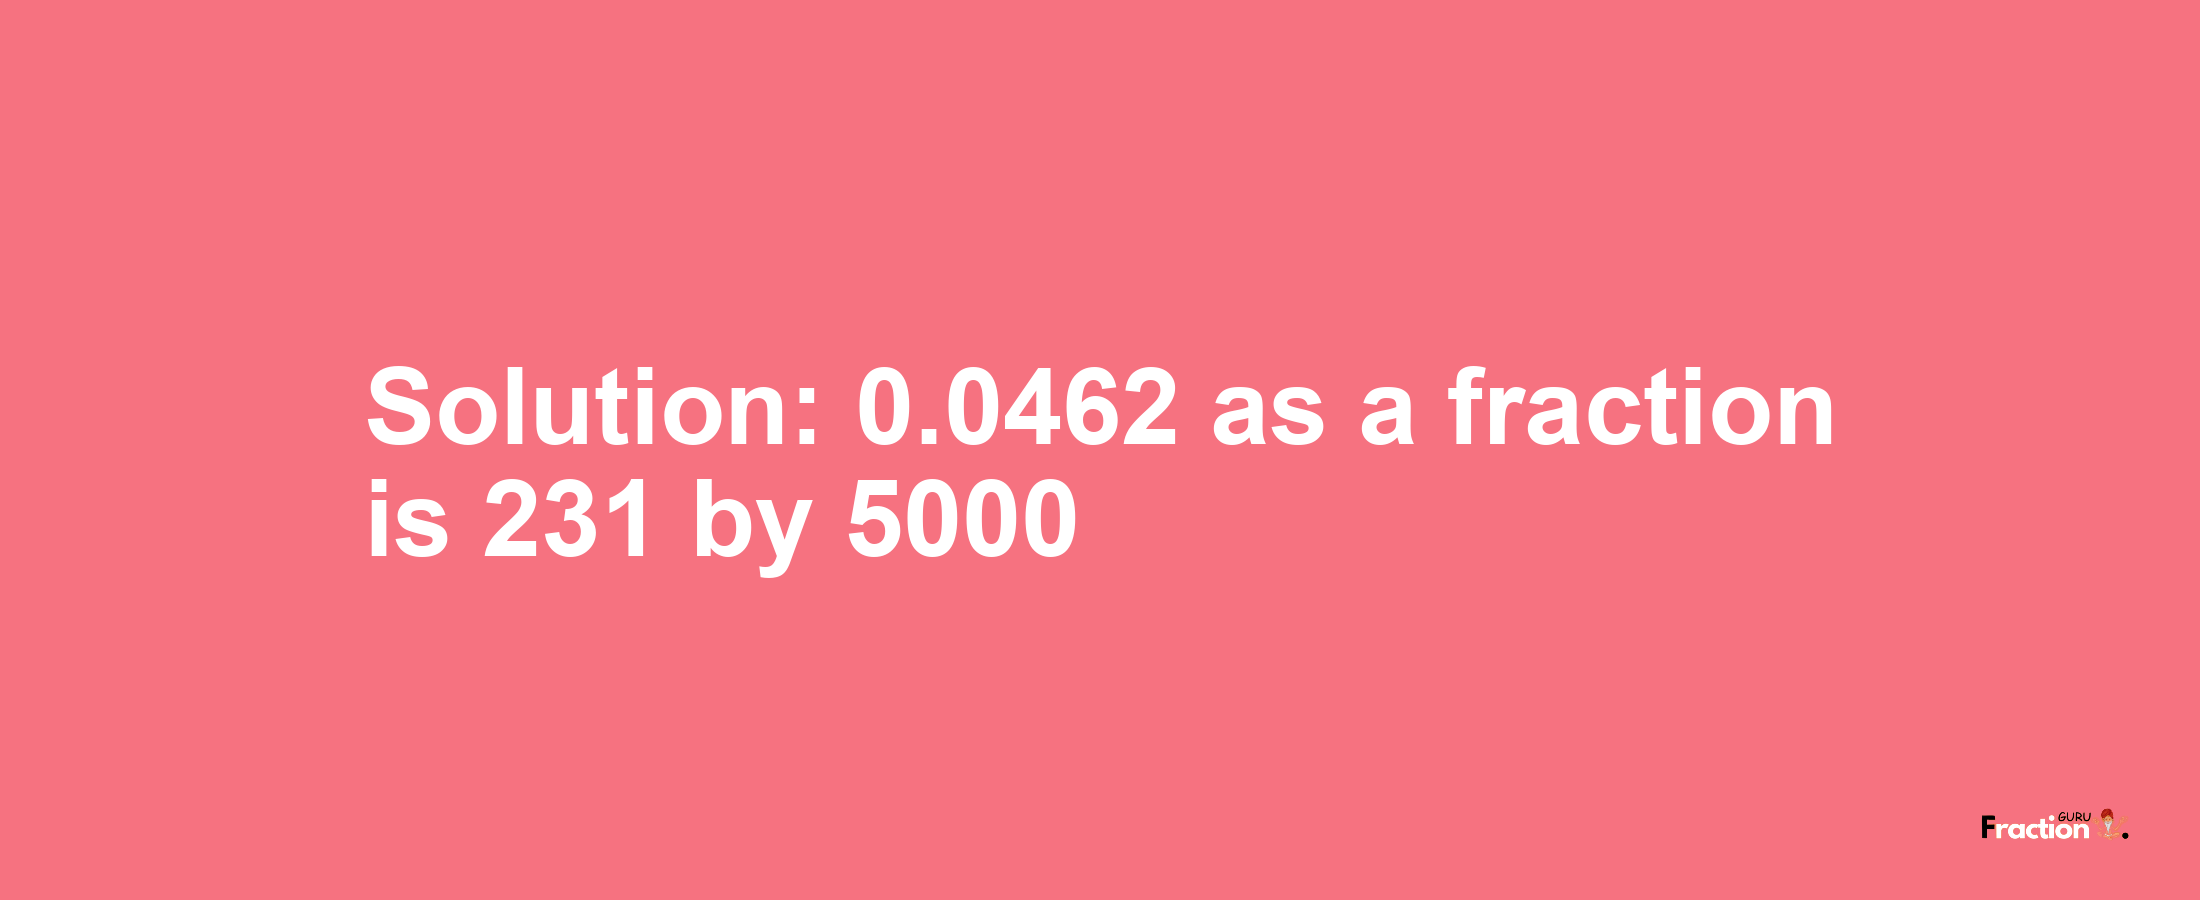 Solution:0.0462 as a fraction is 231/5000